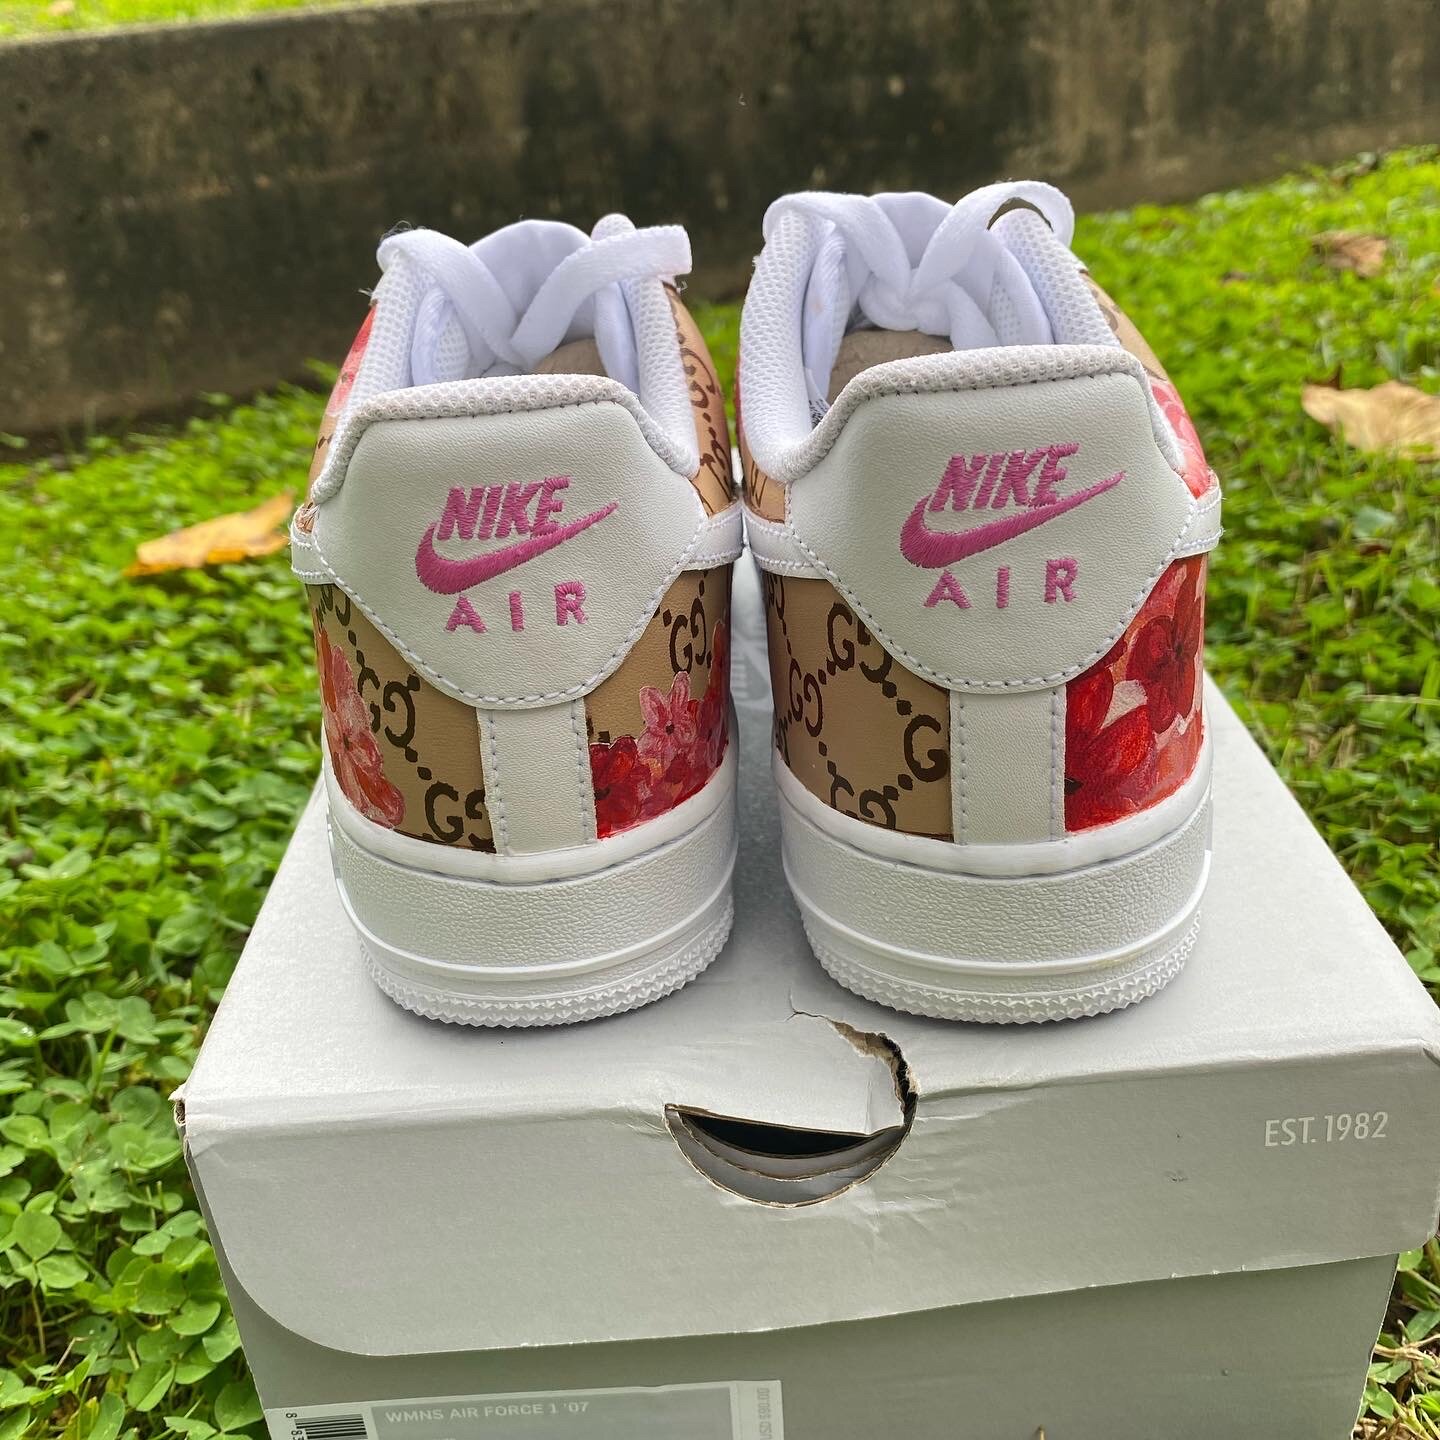 Nike Air Force 1 Flowerbomb by FRE Customs